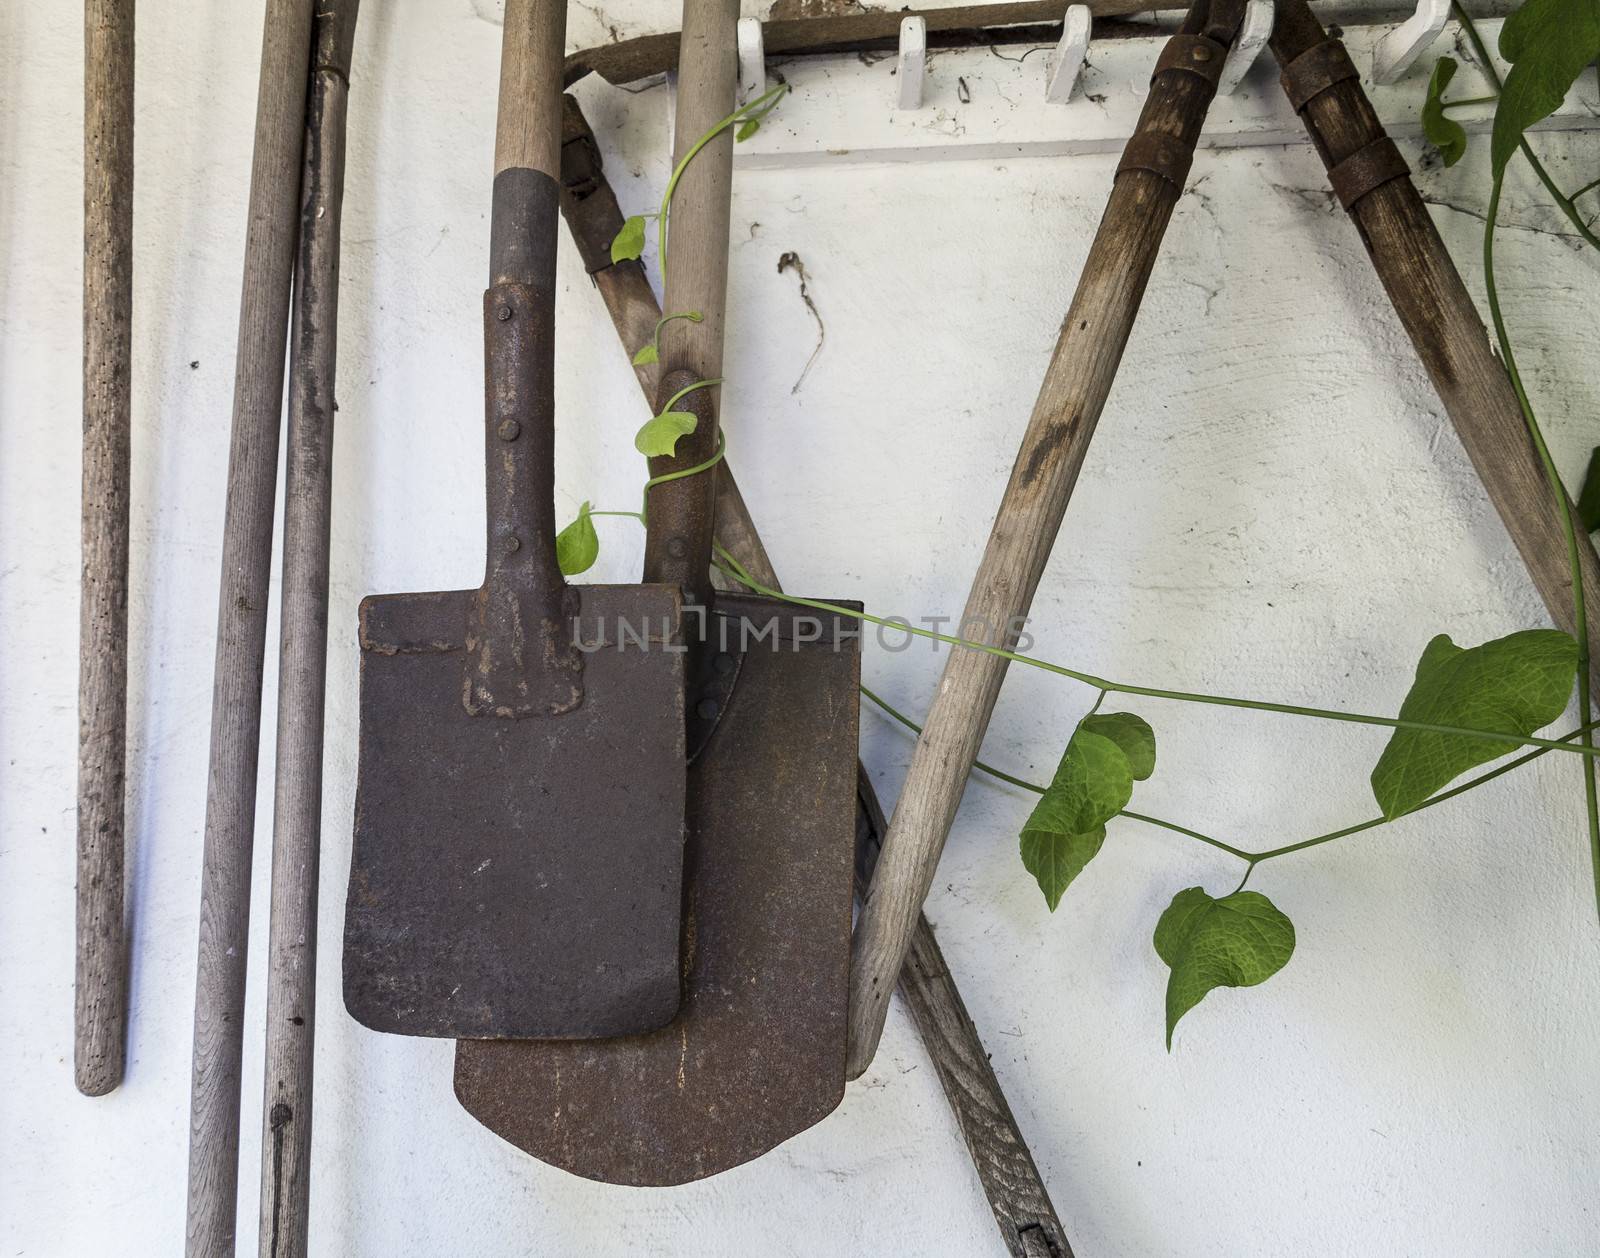 Vintage garden tools hanging on an outdoor wall.